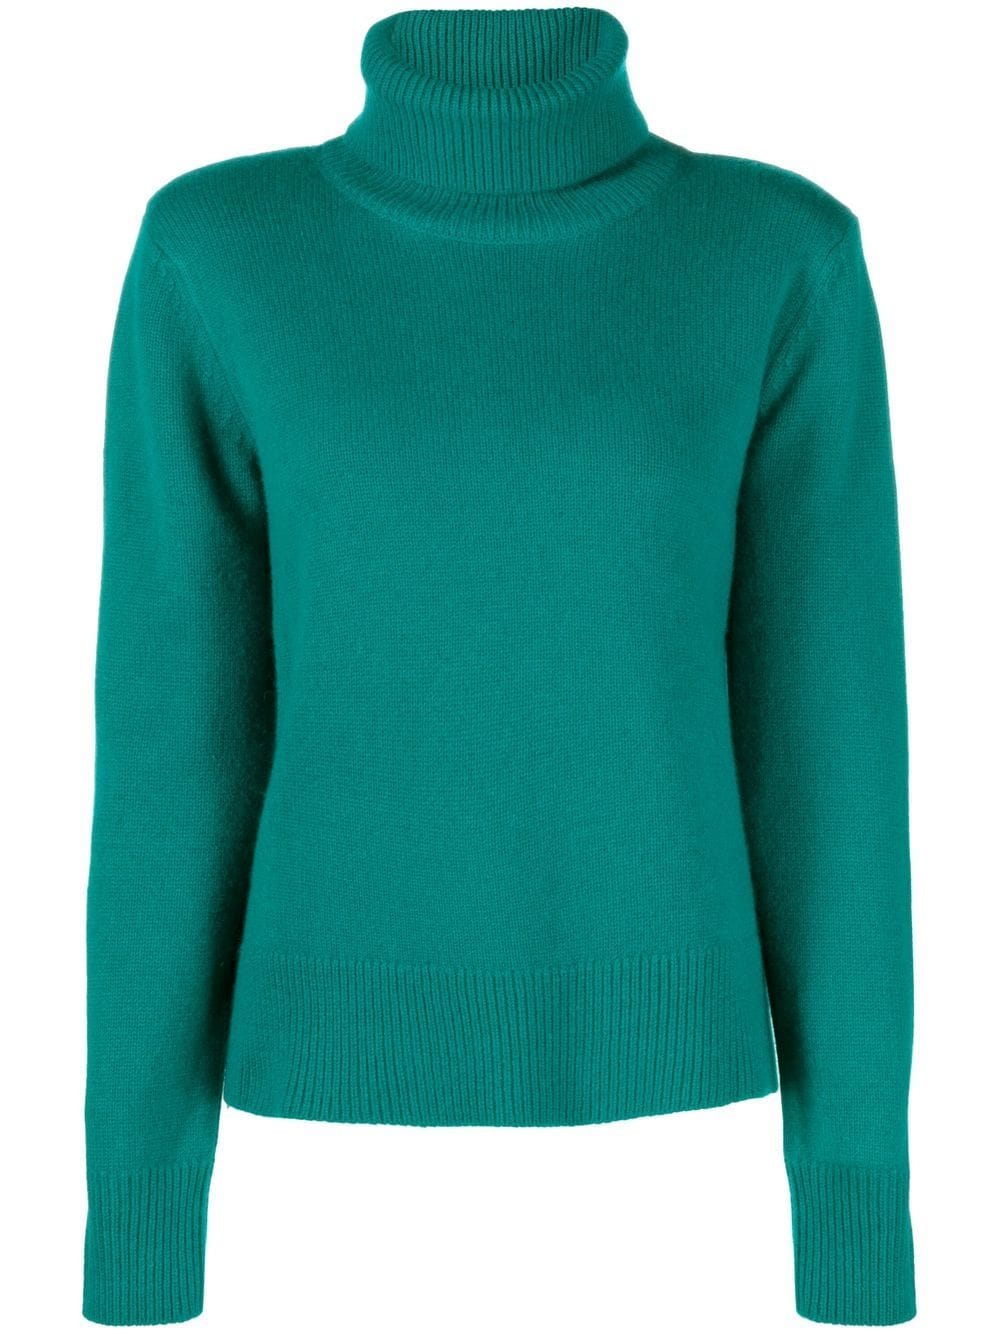 P.A.R.O.S.H. funnel-neck knitted jumper - Green von P.A.R.O.S.H.